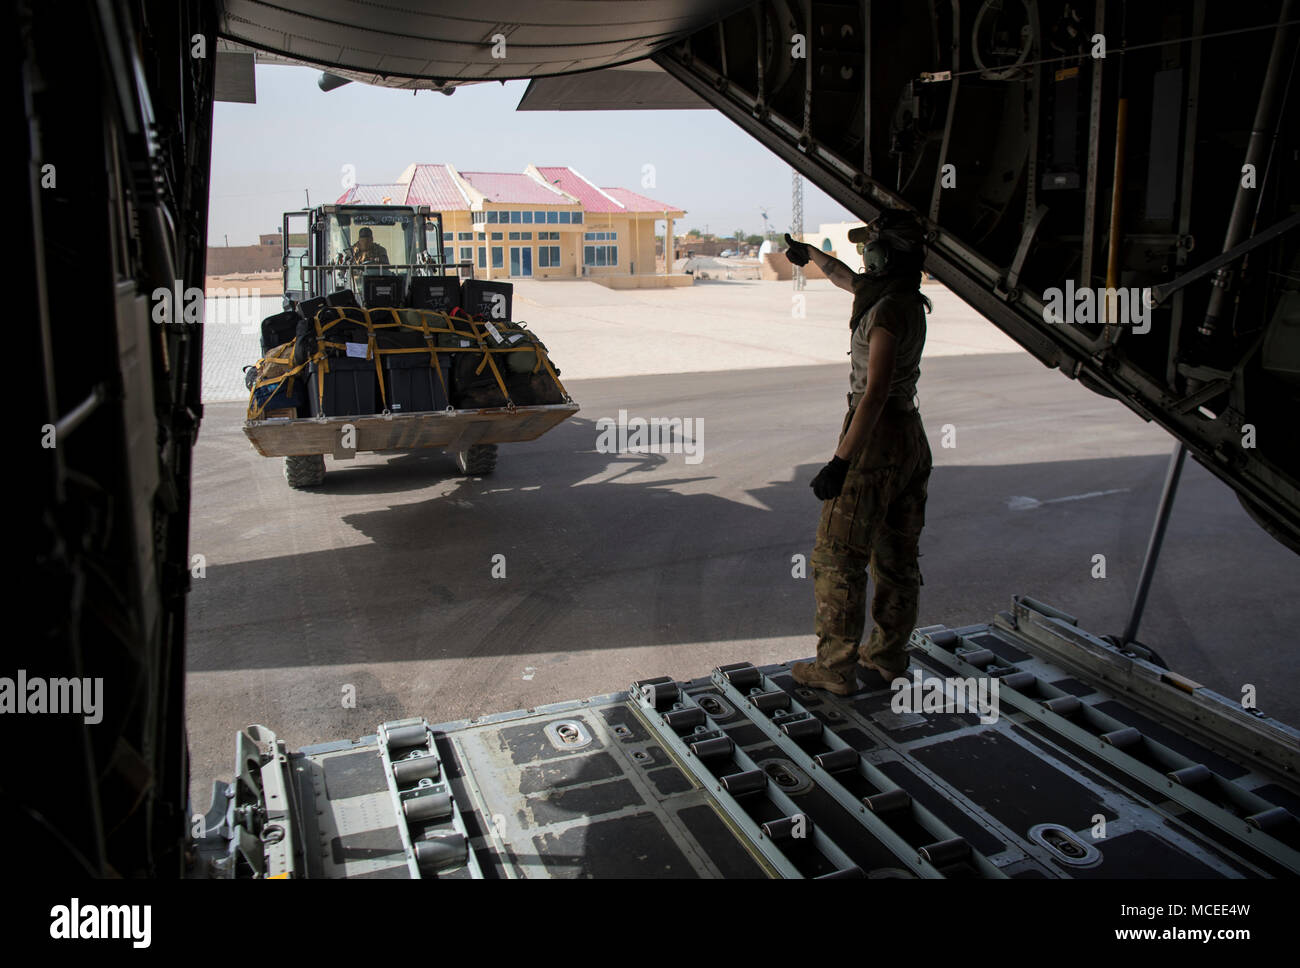 A loadmaster from the West Virginia Air National Guard waves off a forklift April 11, 2018, at Diori Hamani International Airport, Niger. Approximately 1,900 service members from more than 20 African and western partner nations are participating in Flintlock 2018 at multiple locations in Niger, Burkina Faso, and Senegal. Flintlock is an annual, African-led, integrated military and law enforcement exercise that has strengthened key partner nation forces throughout North and West Africa as well as western Special Operations Forces since 2005.  (U.S. Air Force photo/Senior Airman Clayton Cupit) Stock Photo